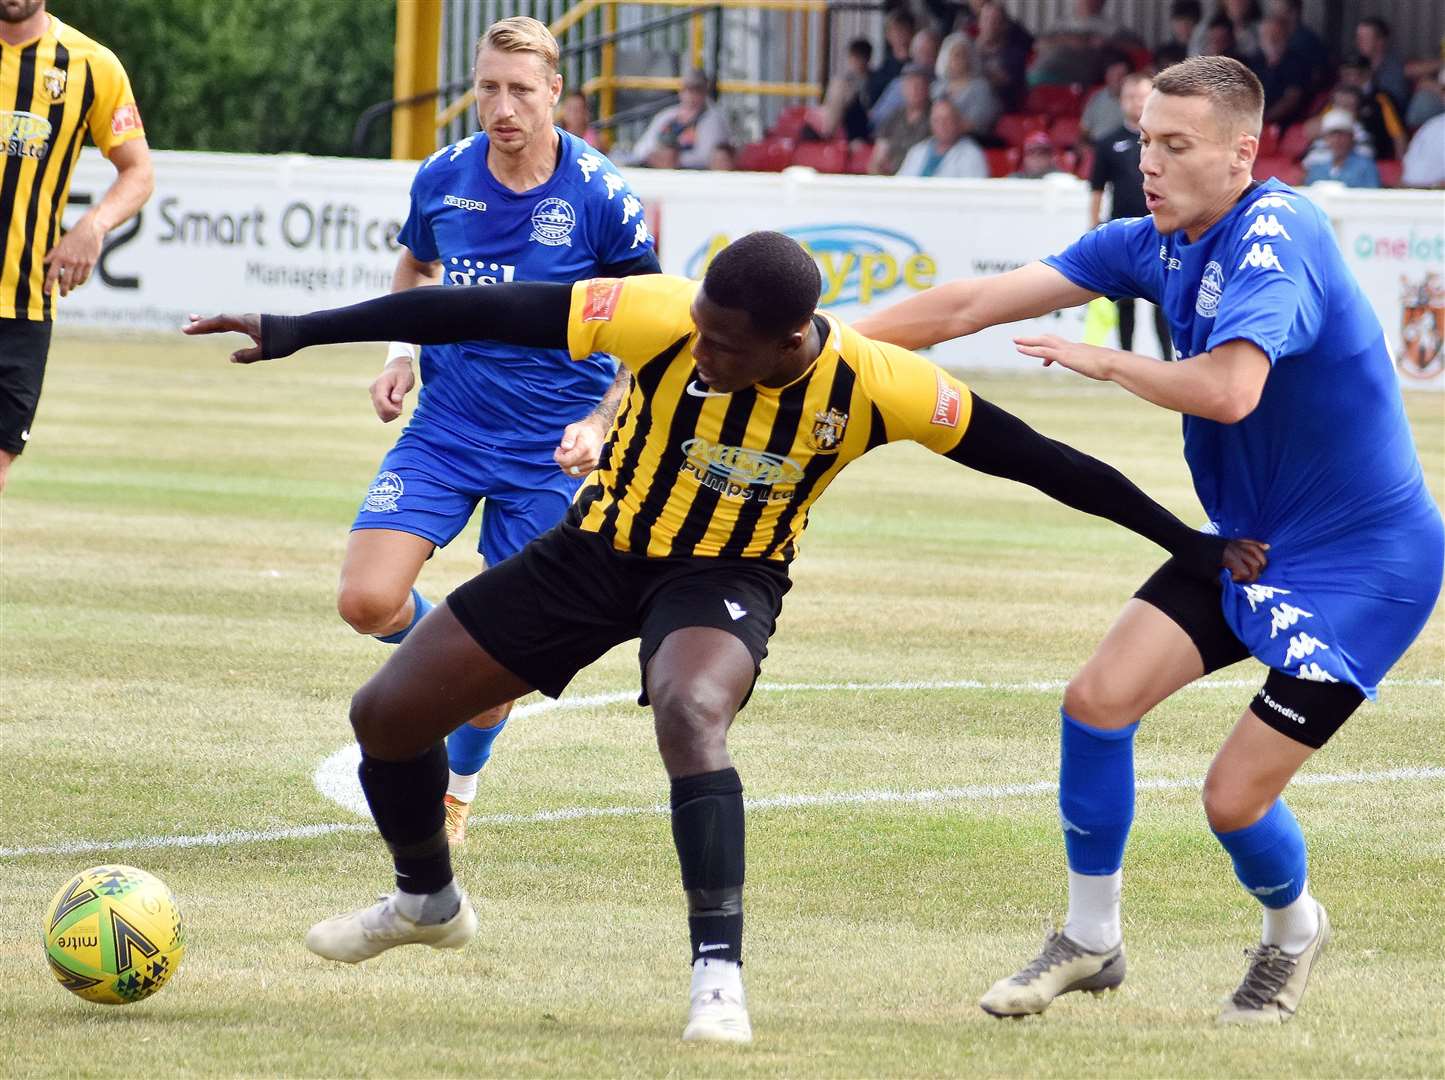 Dover's Arjanit Krasniqi closes down Folkestone frontman Ade Yusuff during the weekend's friendly which finished 1-0 to Invicta. Picture: Randolph File